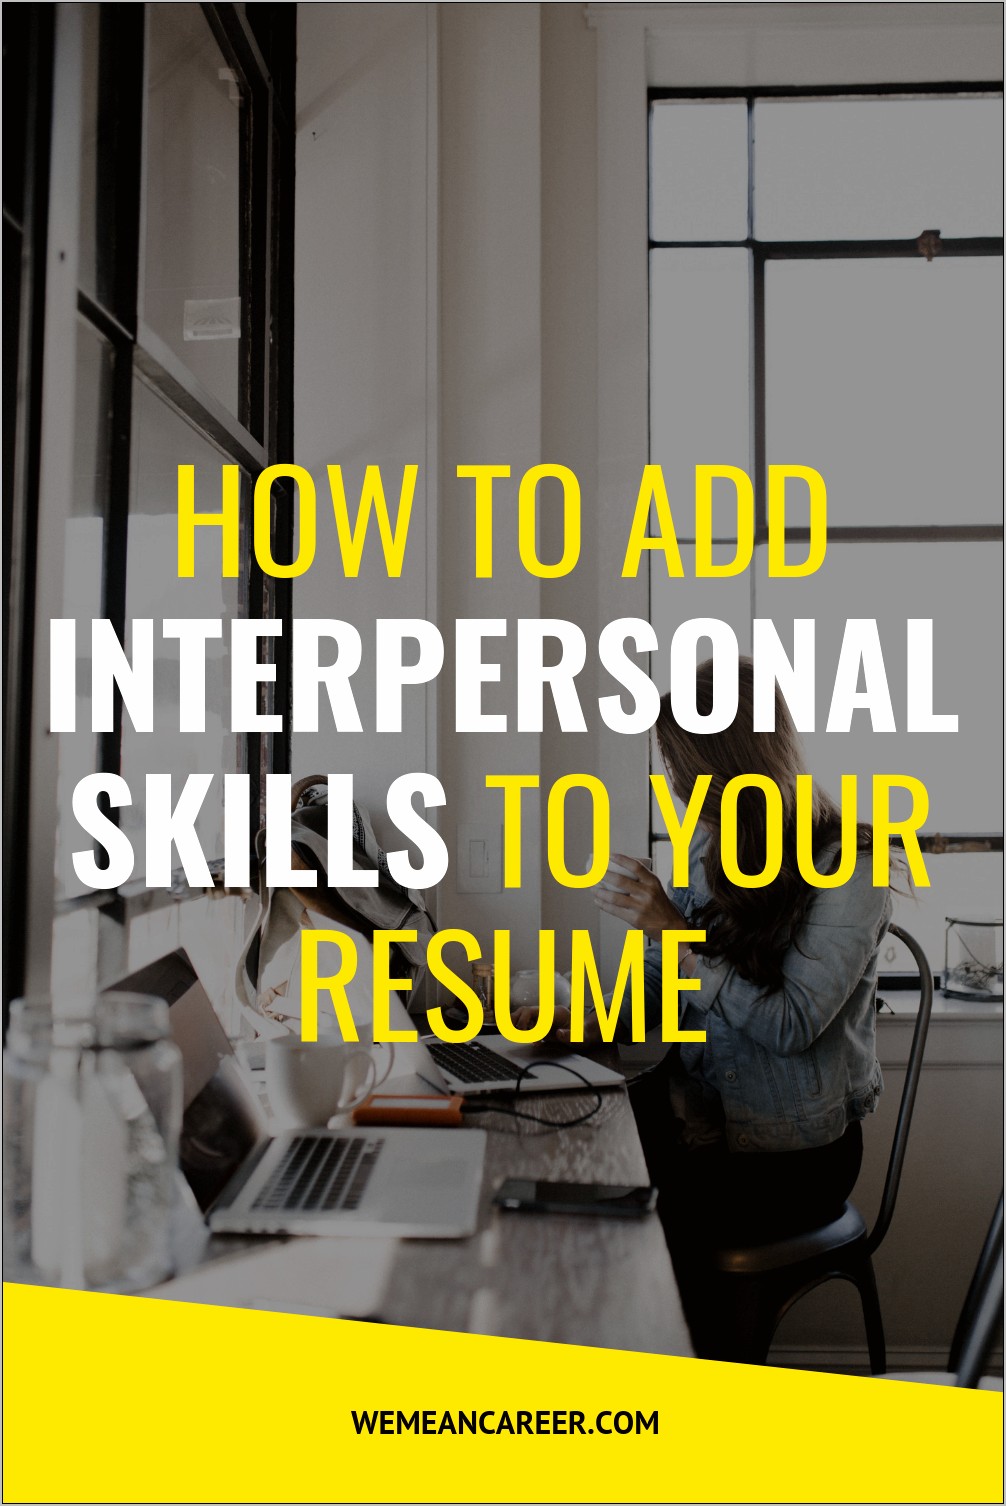 Resume Writing For Interpersonal Skills